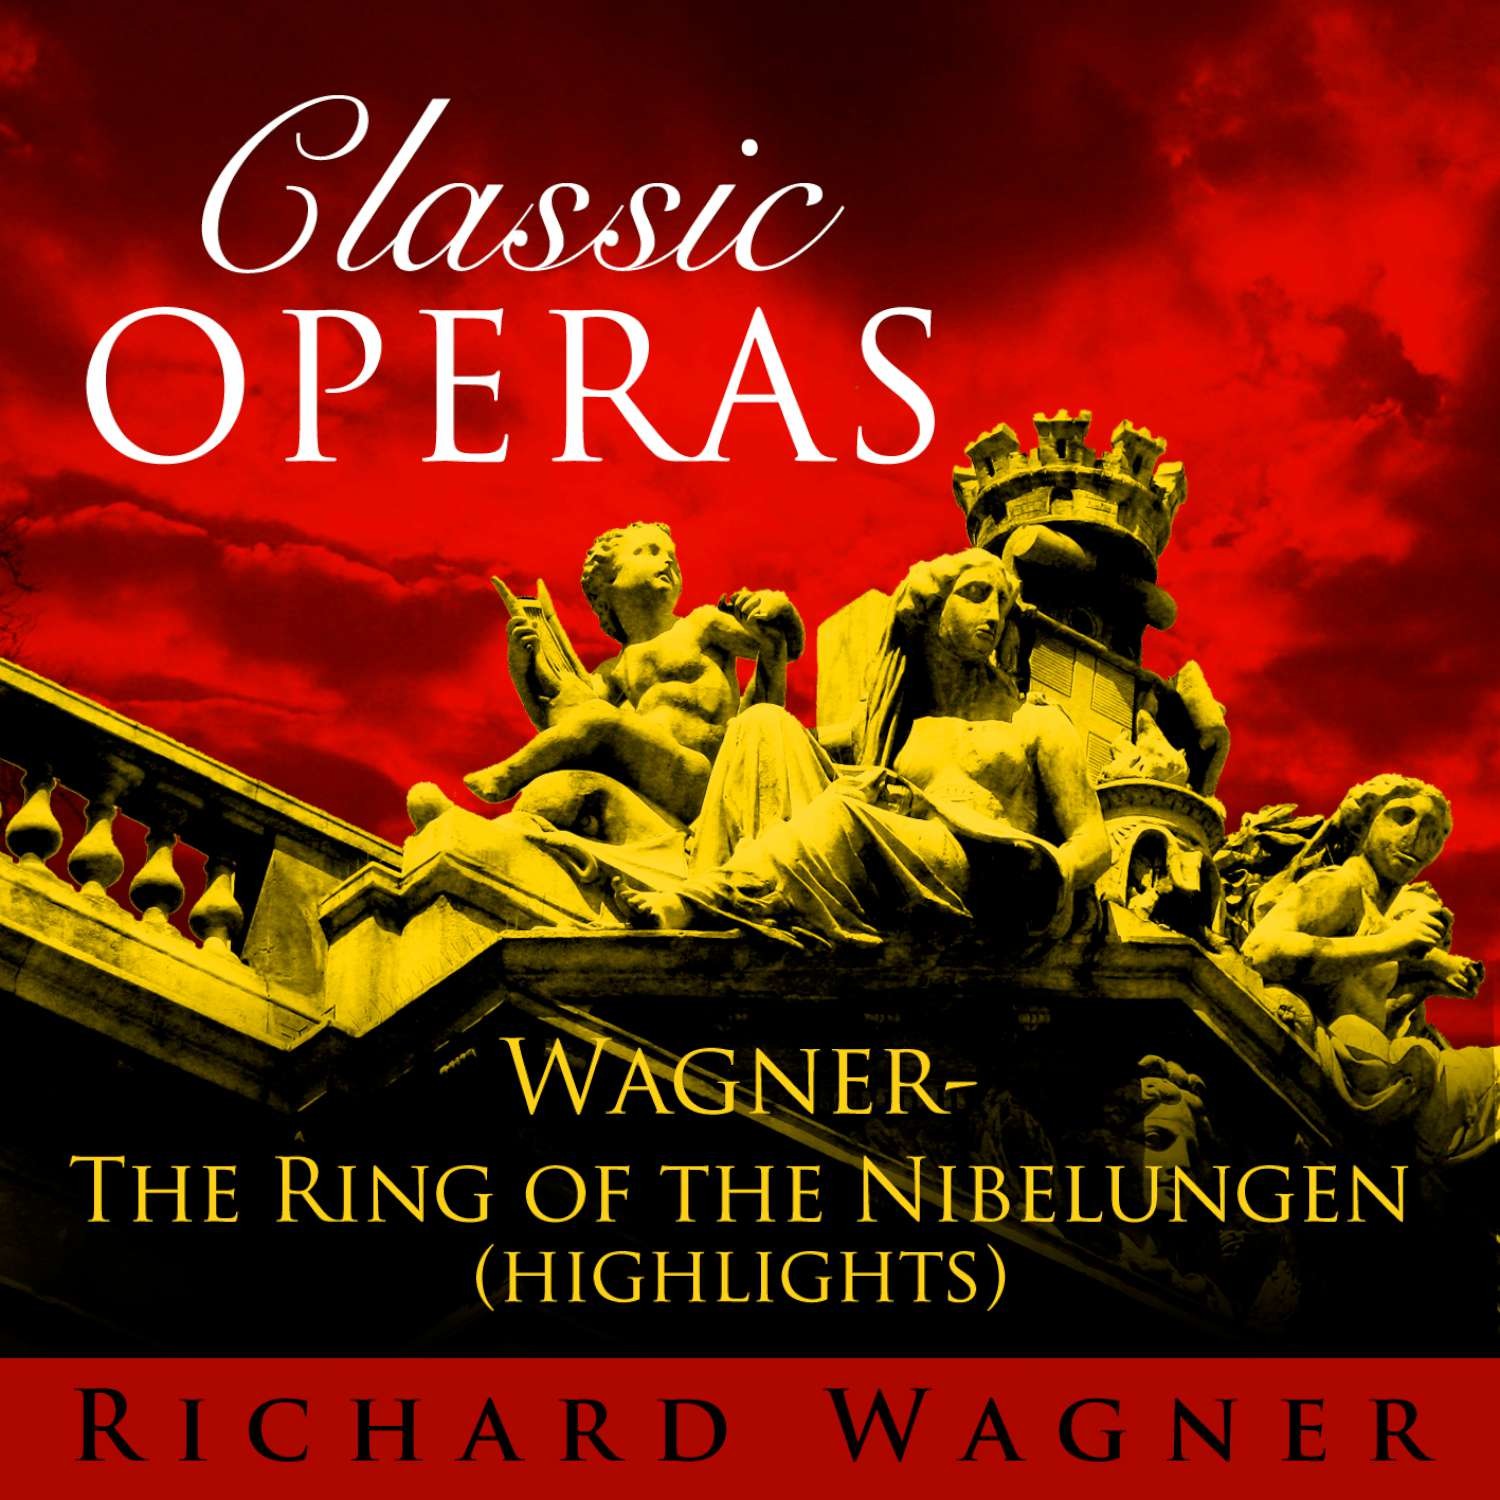 Classic Opera's - Wagner: The Ring of the Nibelungen (Highlights)